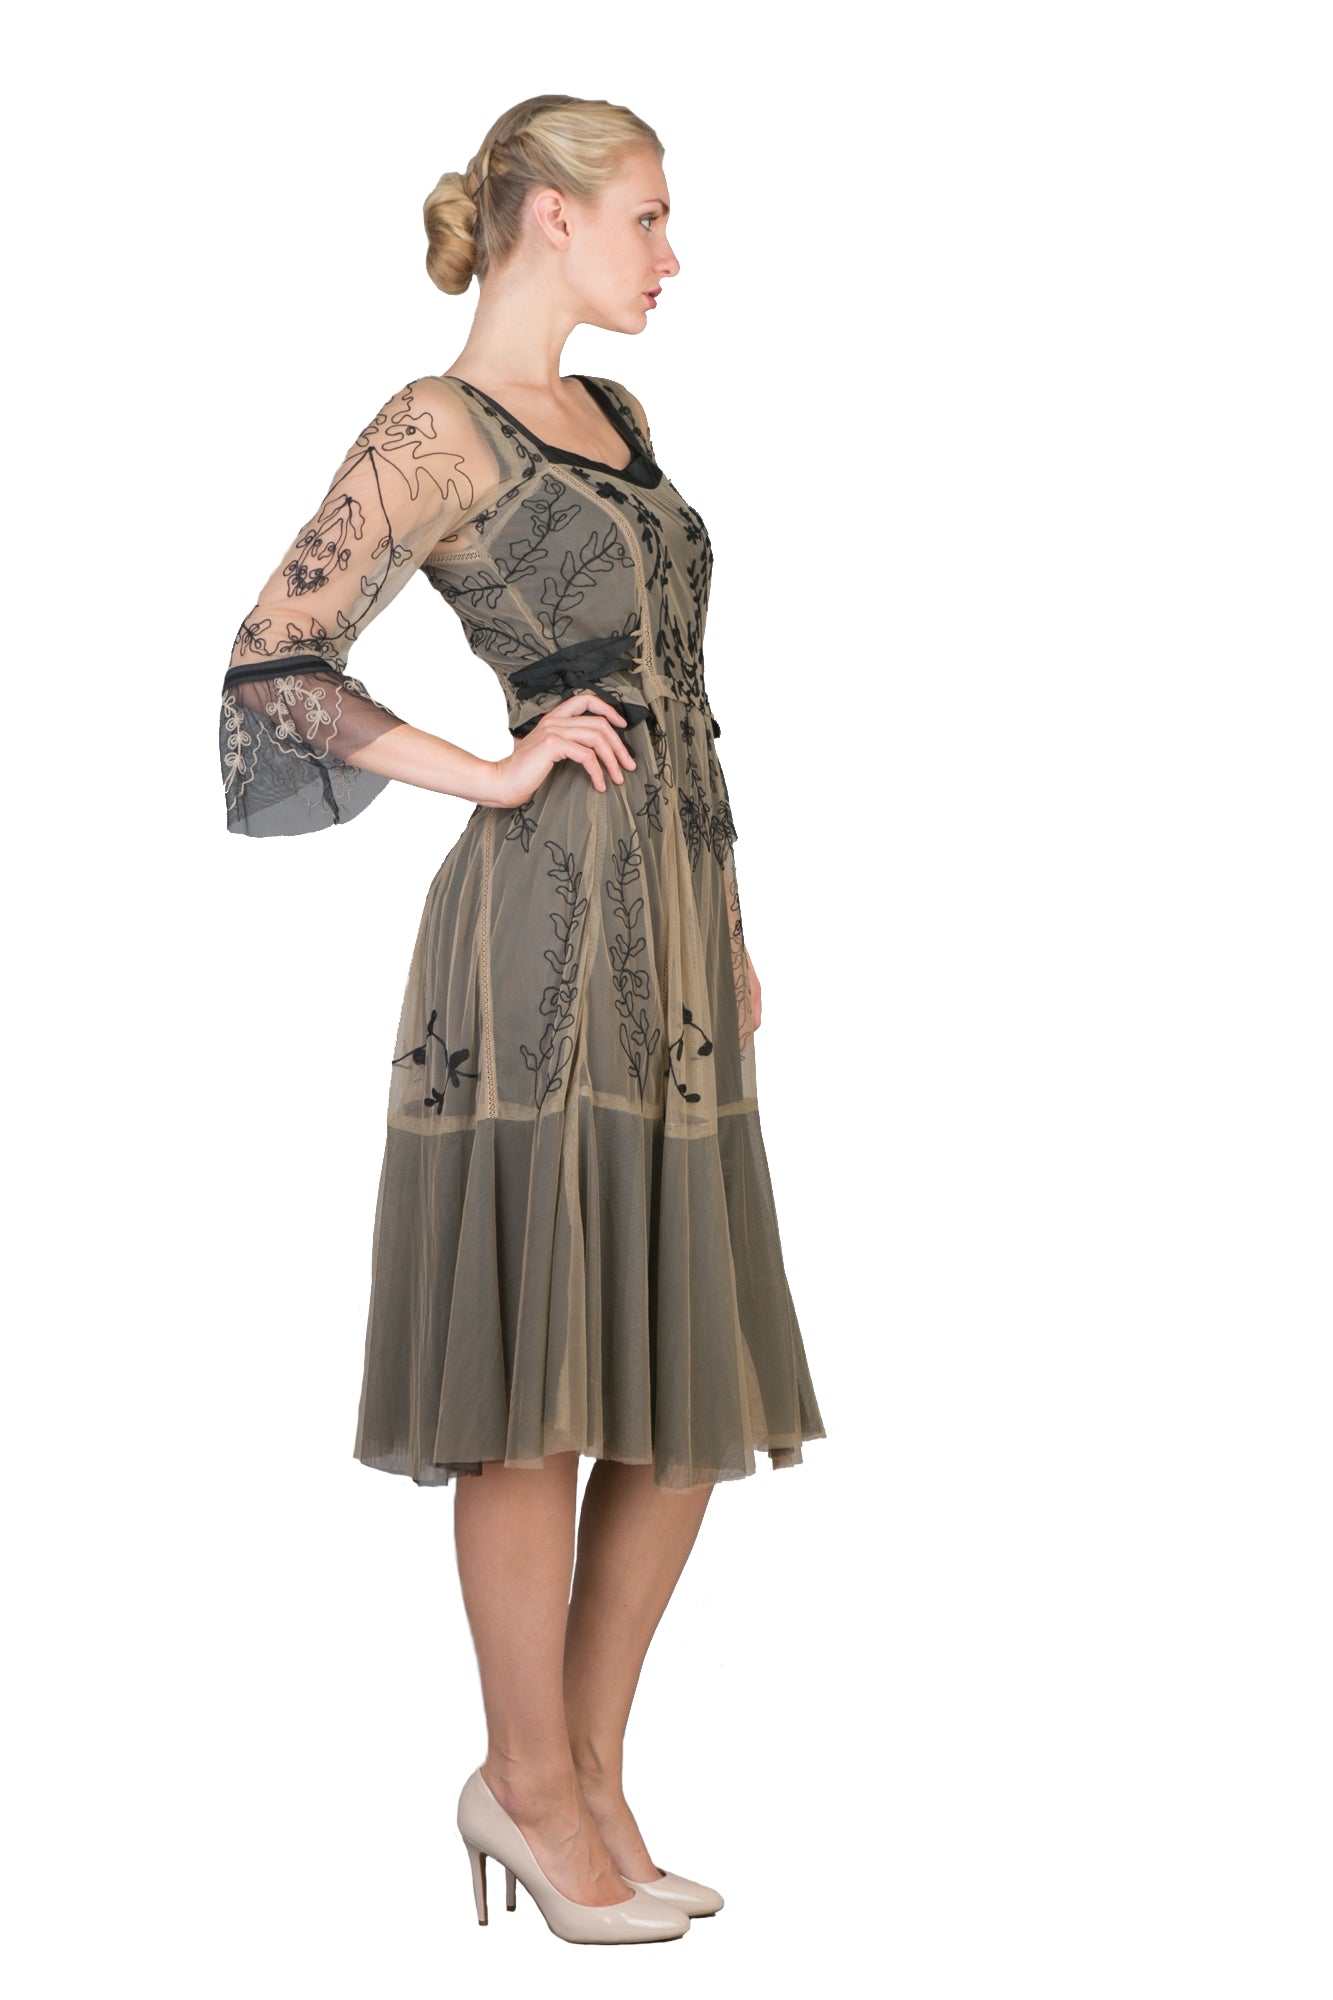 Romantic Embroidered Vintage Party Dress in Black-Beige by Nataya - SOLD OUT